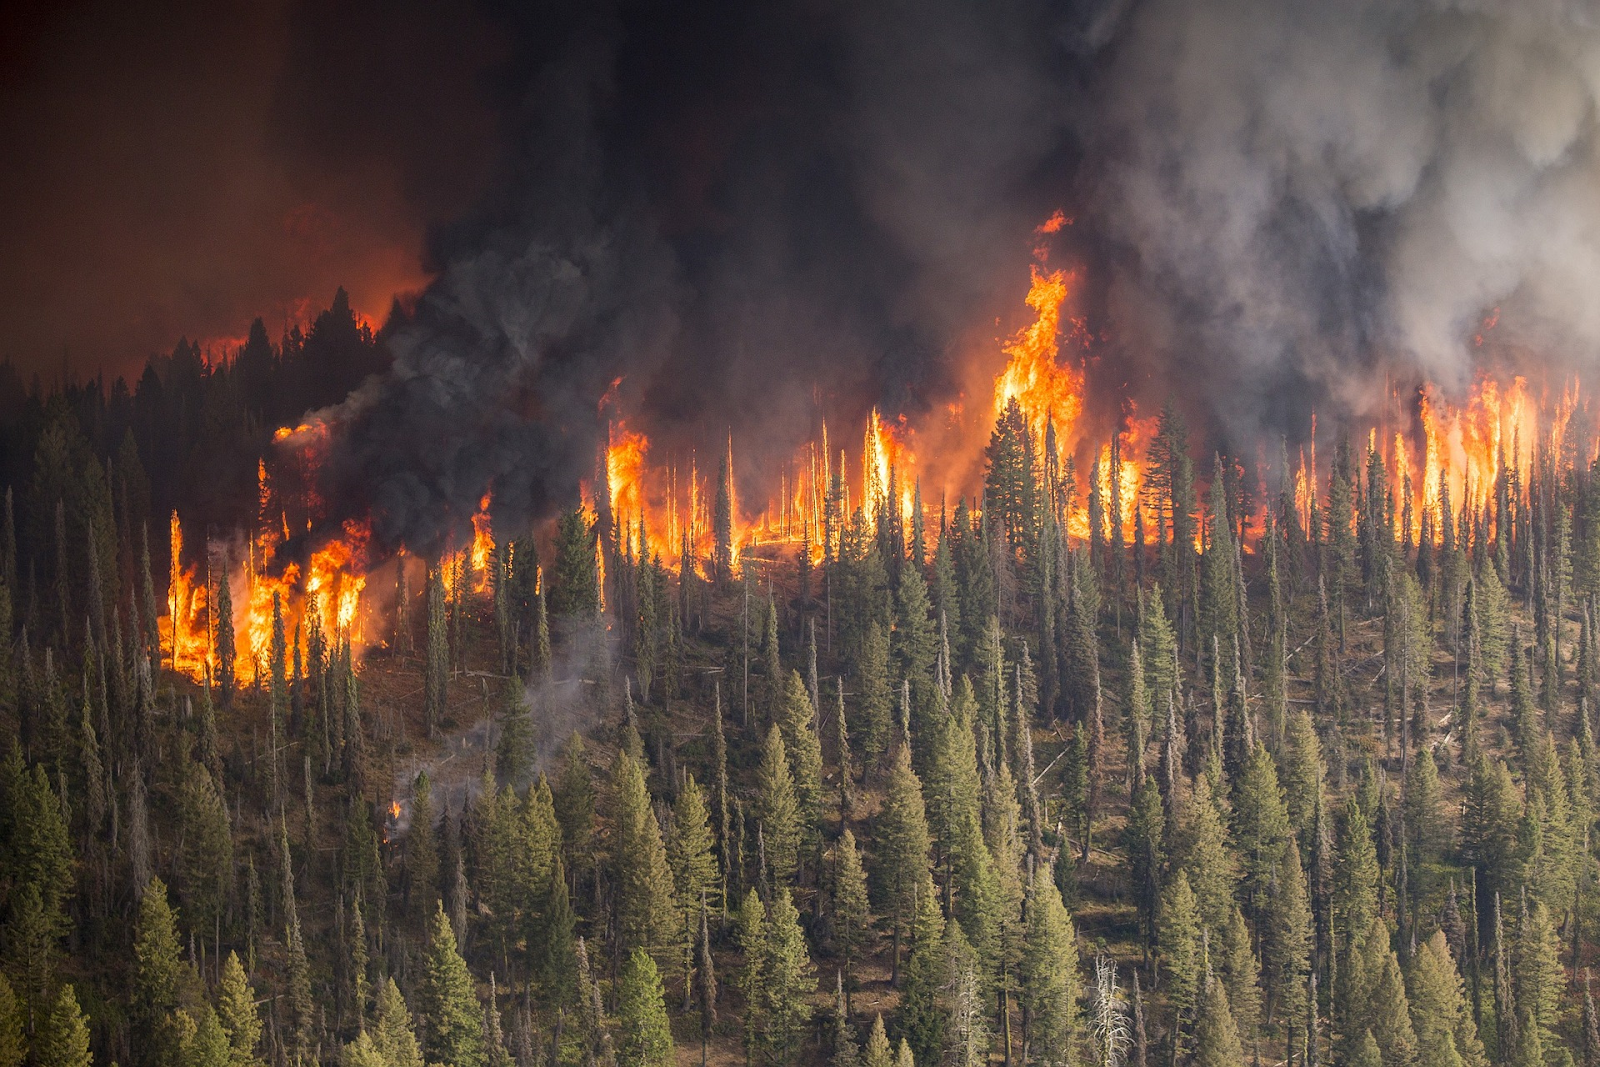 Wildfire consuming a forest.